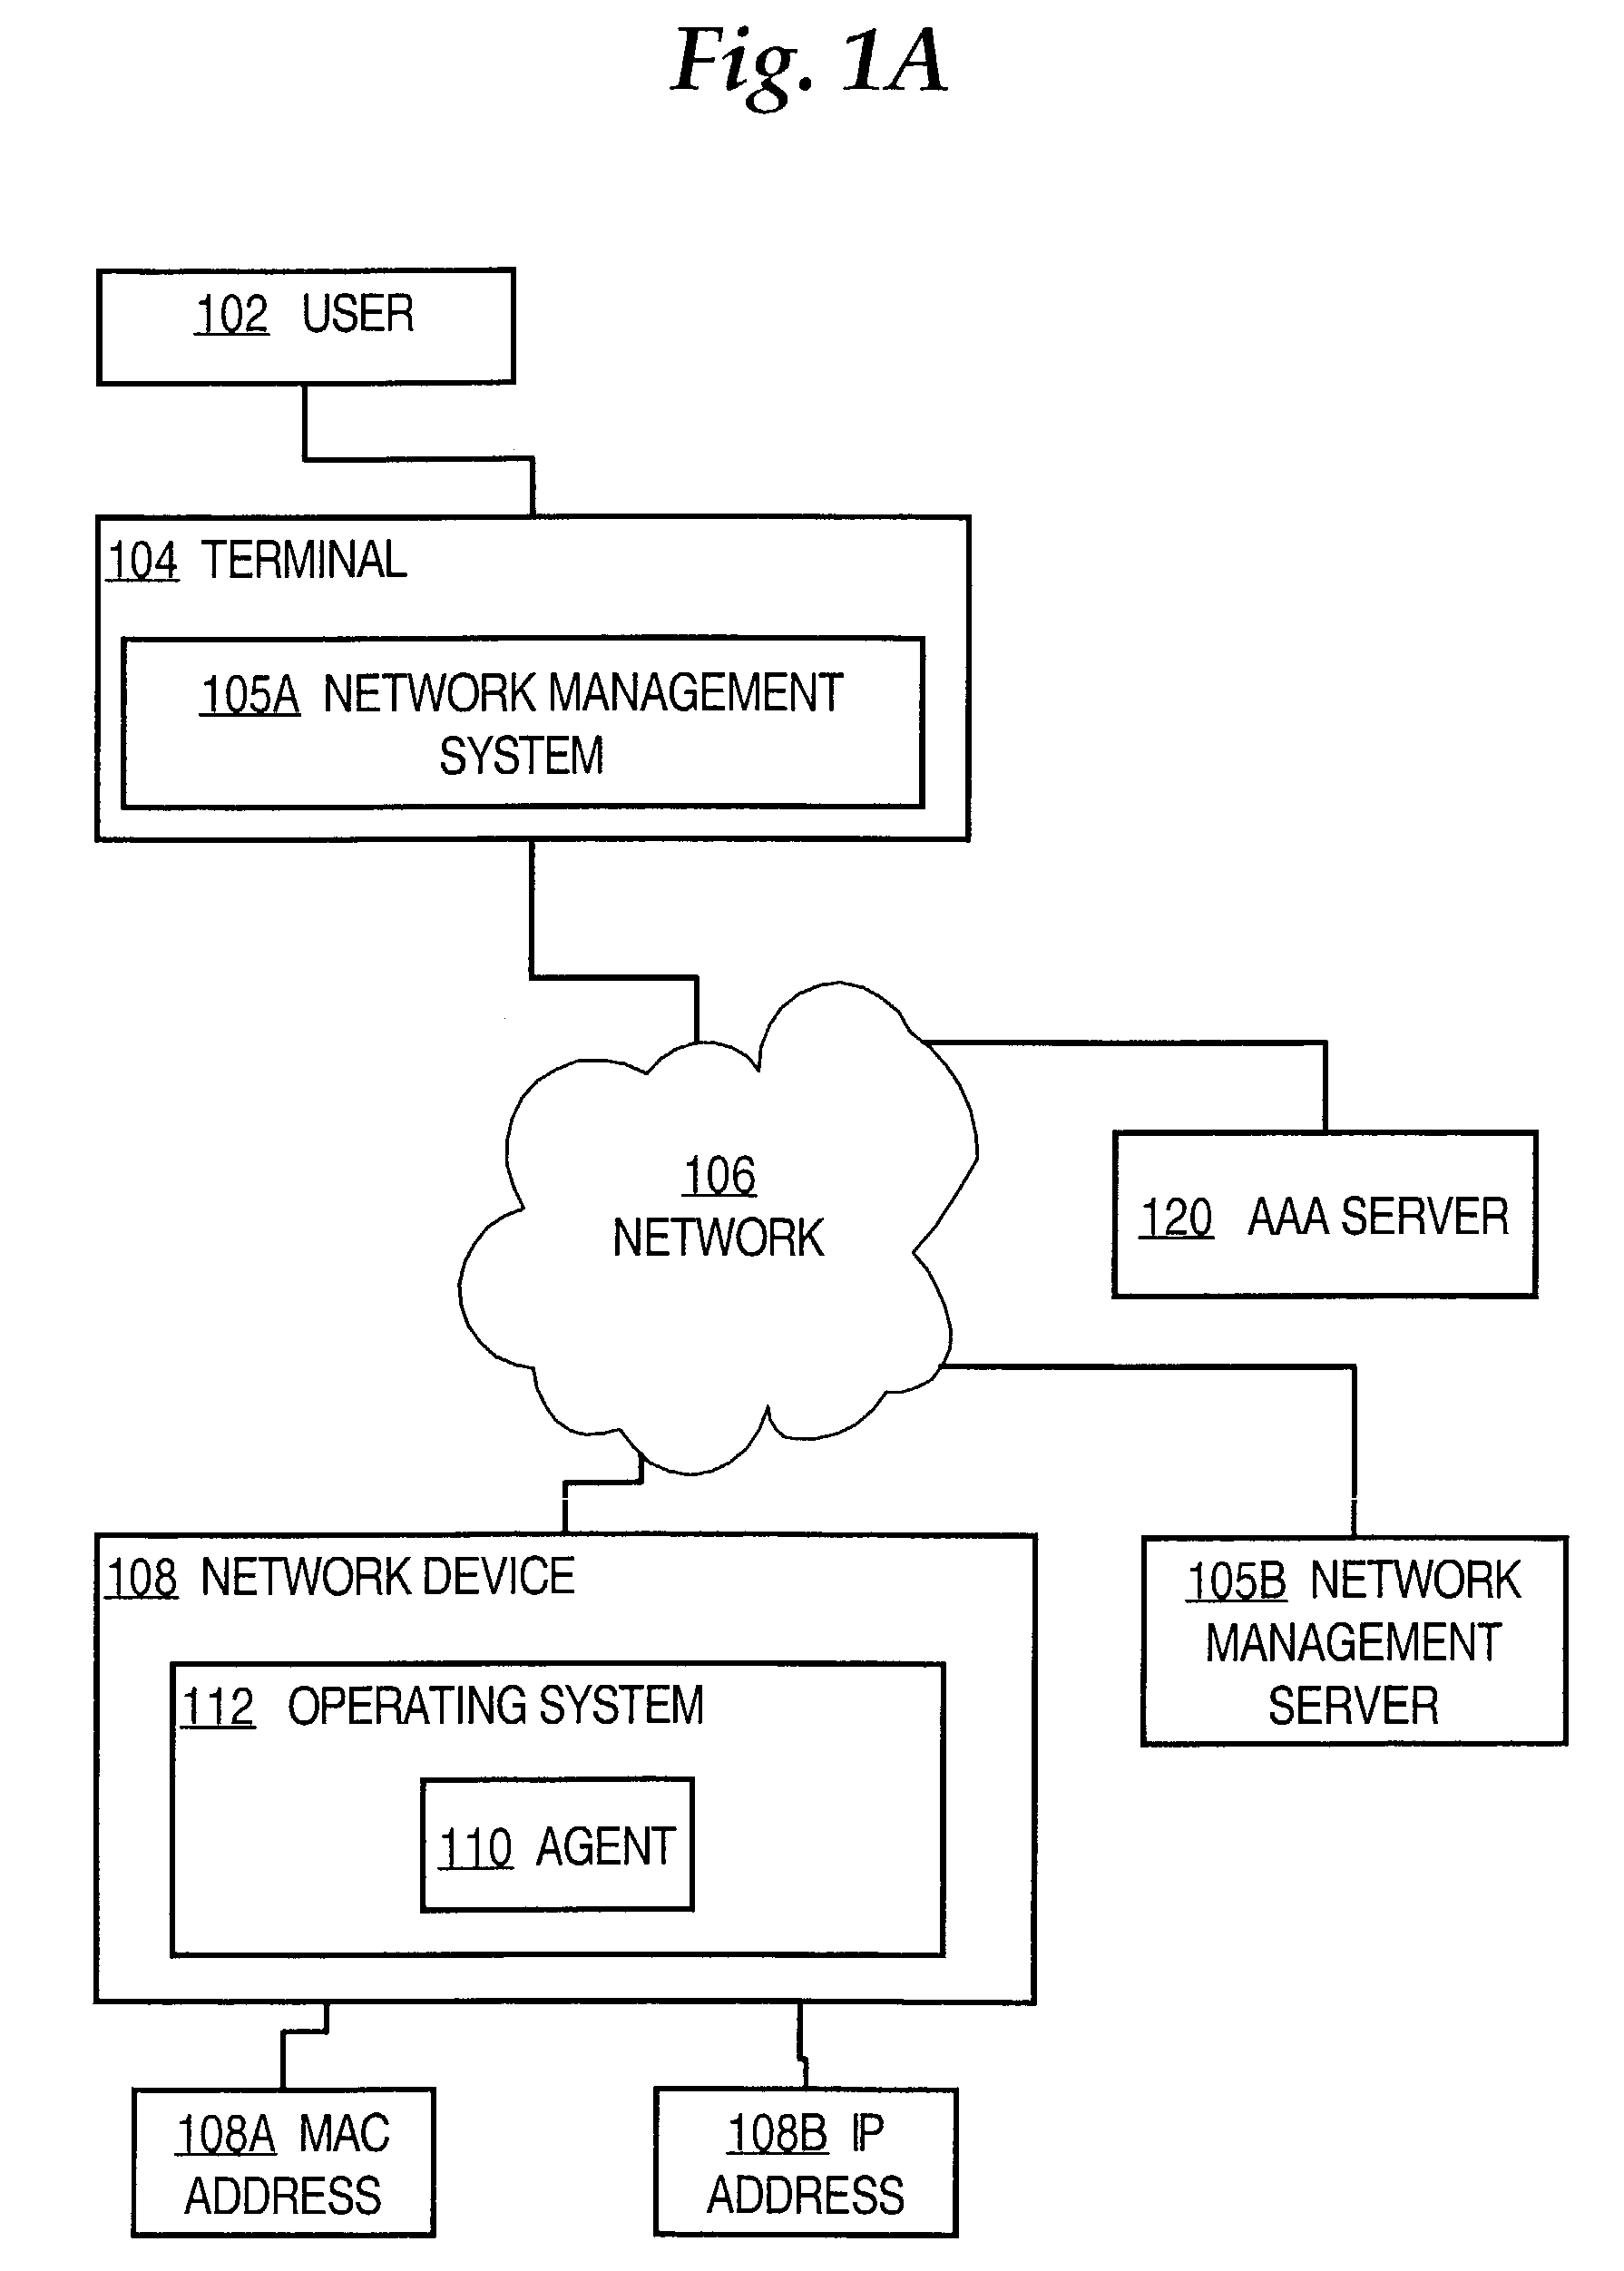 Method and apparatus for authorizing network device operations that are requested by applications